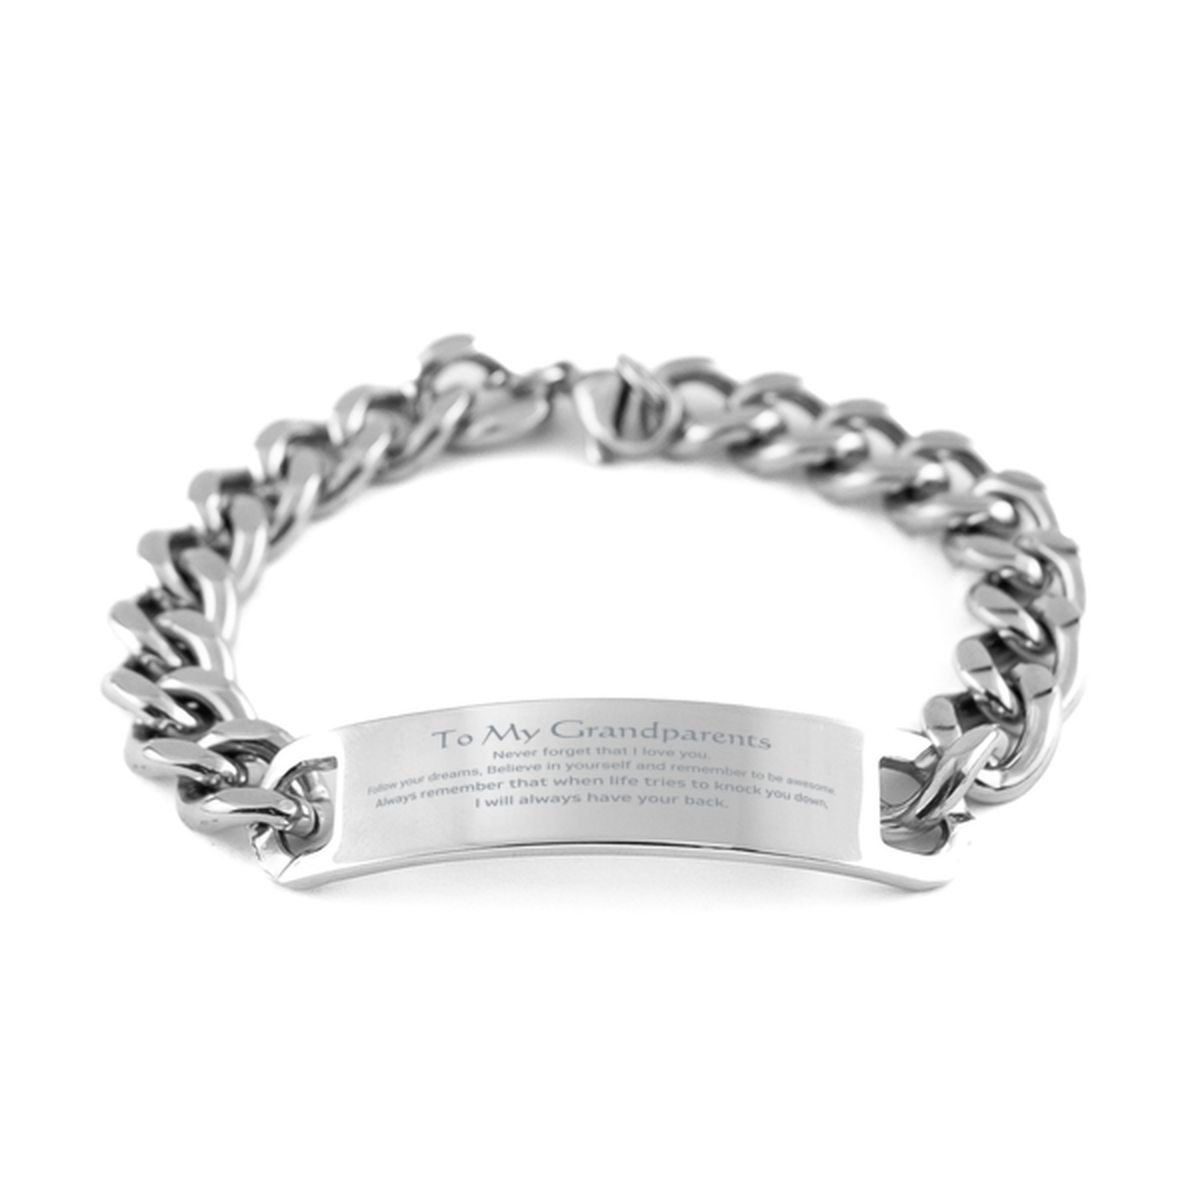 Inspirational Gifts for Grandparents, Follow your dreams, Believe in yourself, Grandparents Cuban Chain Stainless Steel Bracelet, Birthday Christmas Unique Gifts For Grandparents